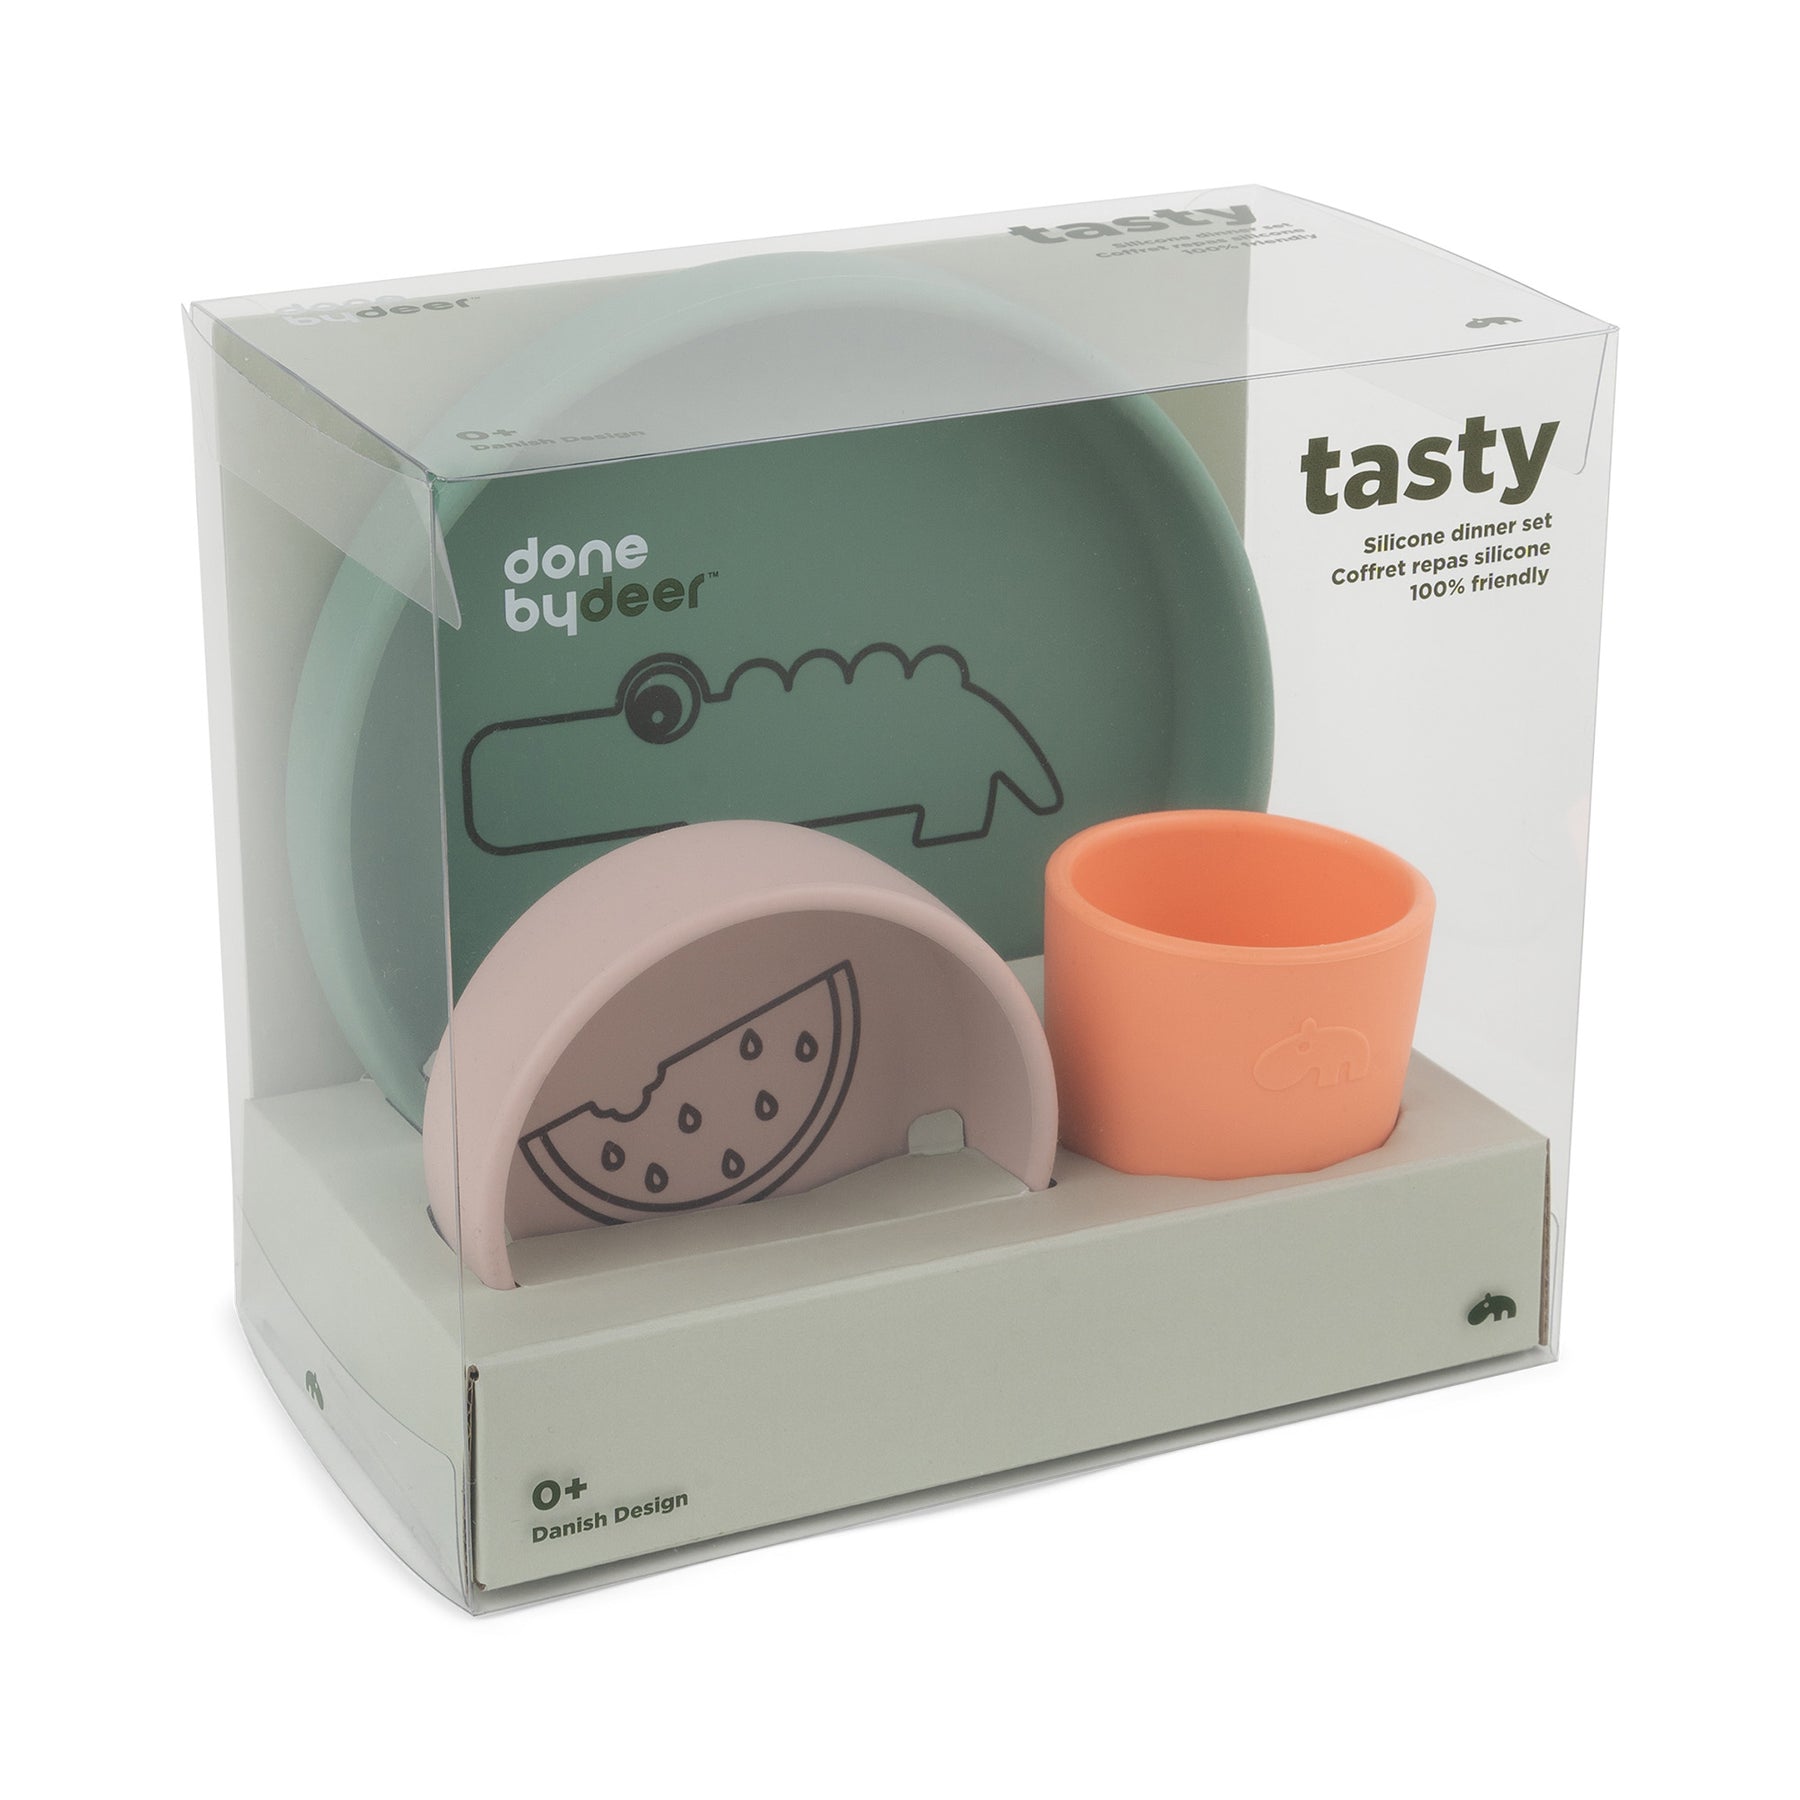 Silicone dinner set - Croco - Colour mix - Packaging